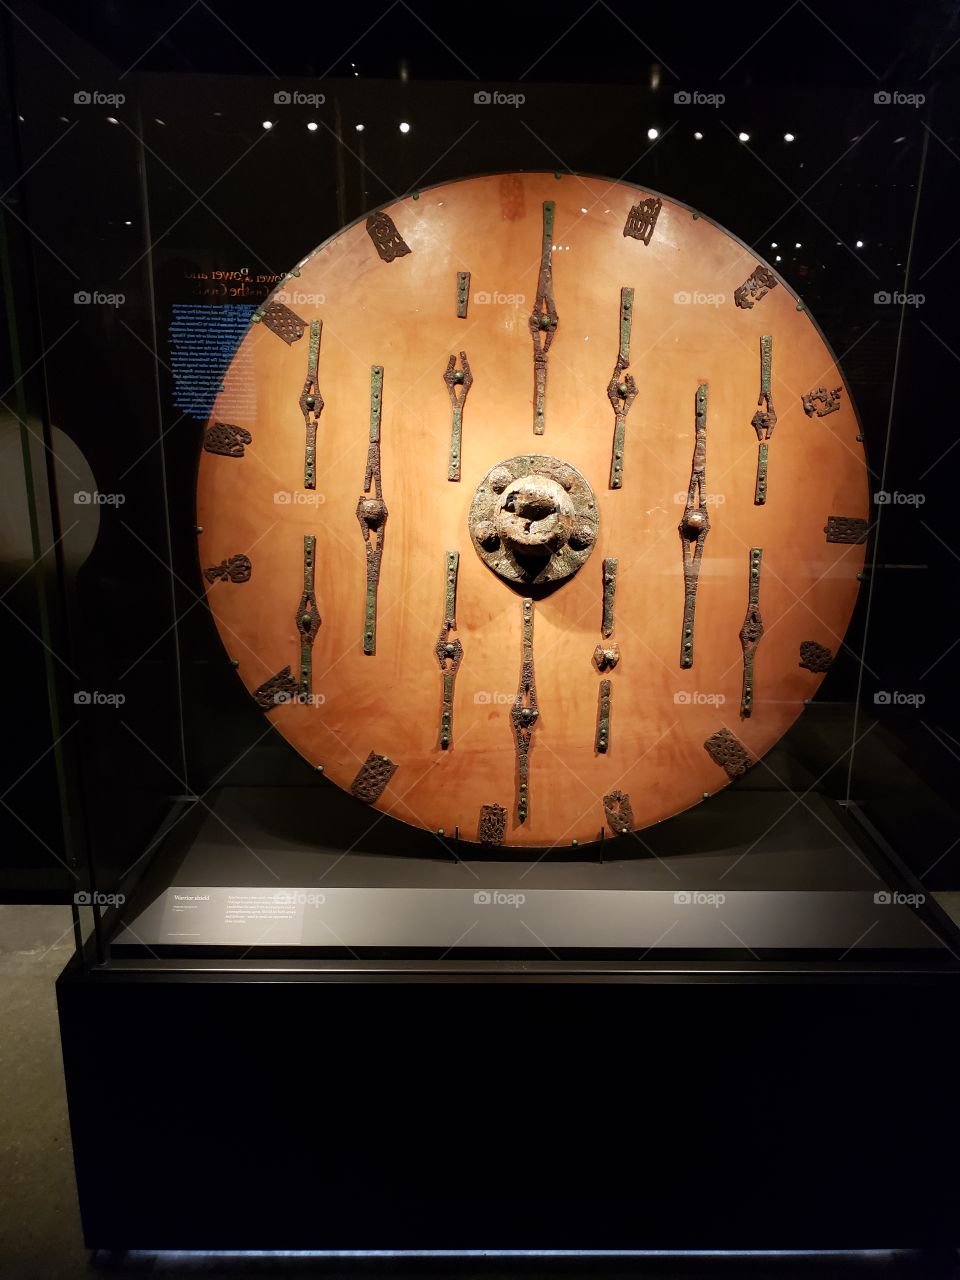 A shield used during battle. Taken at the seaport museum in mystic, ct. The shield is huge, but very thin! Made a neat photo!